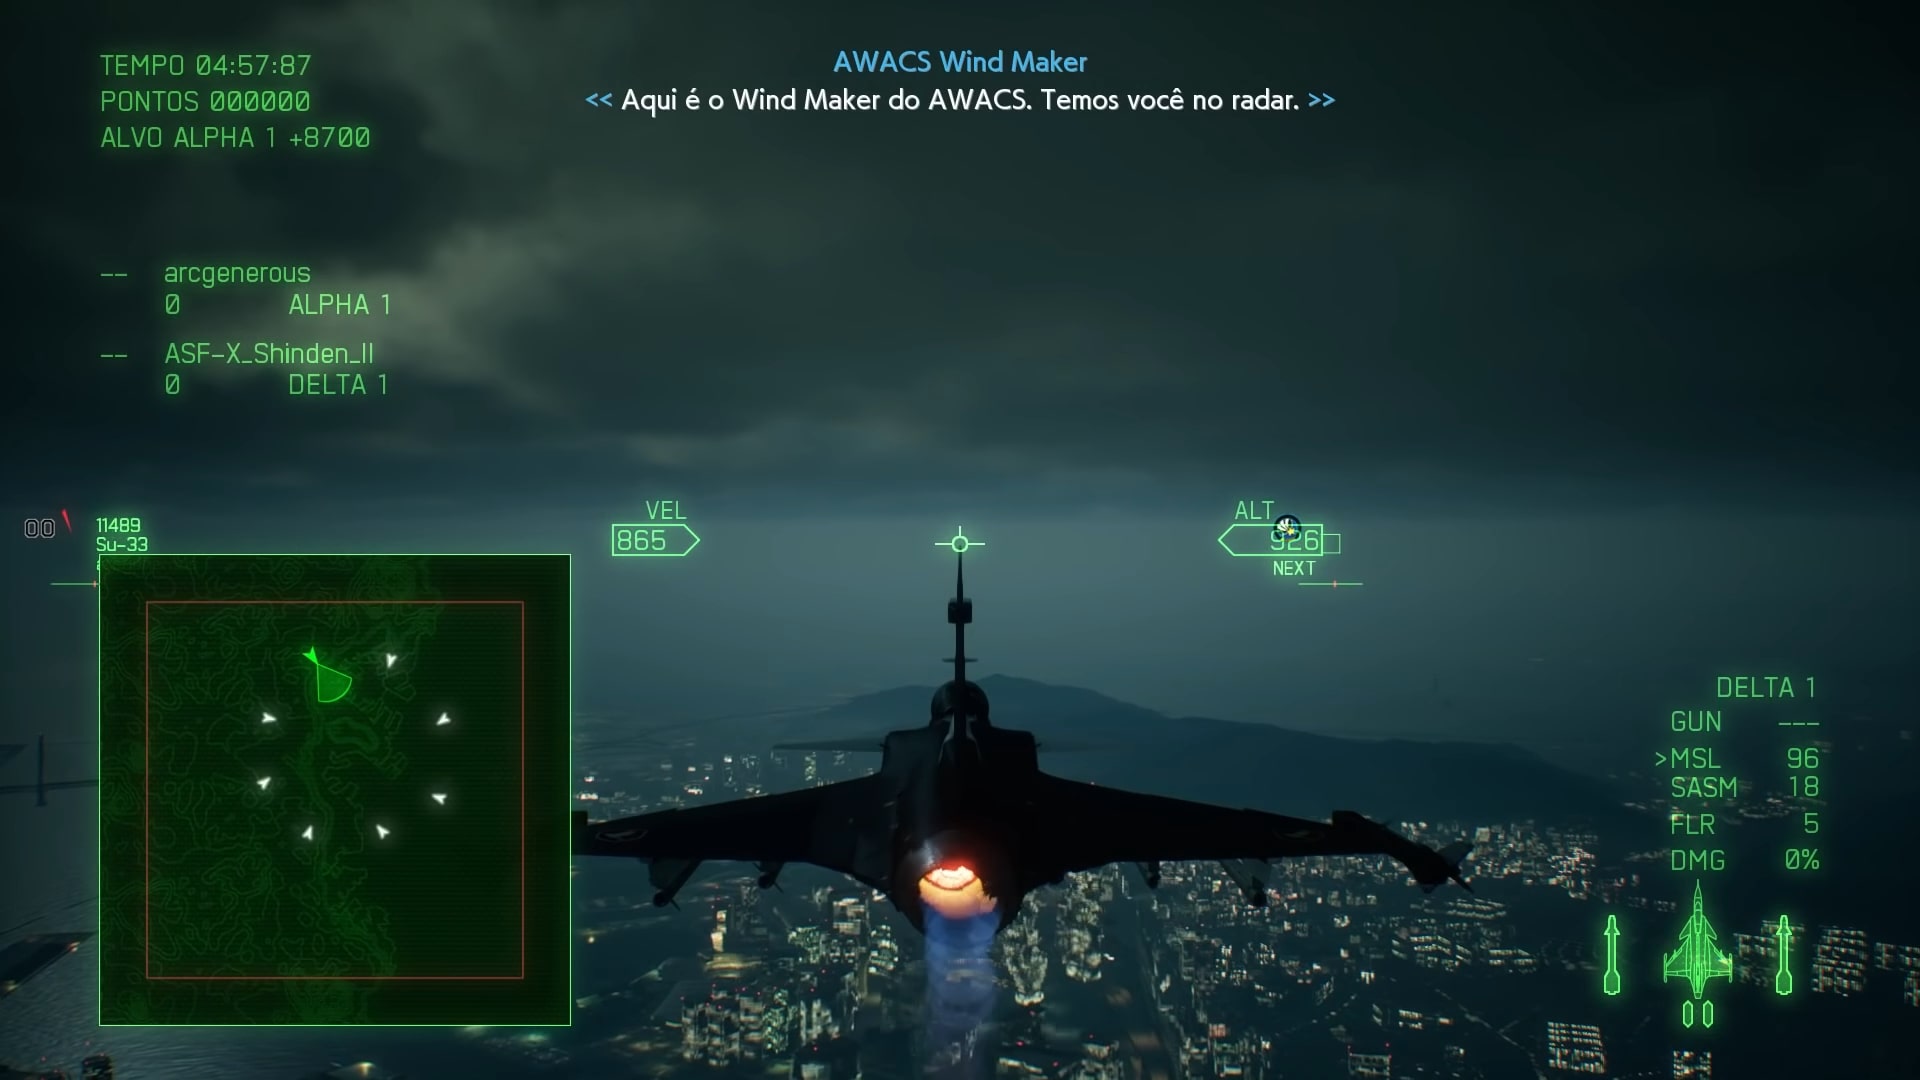 Ace Combat 7 Skies Unknown Gameplay, Ace Combat 7 Skies Unknown Gameplay, By K_gaming